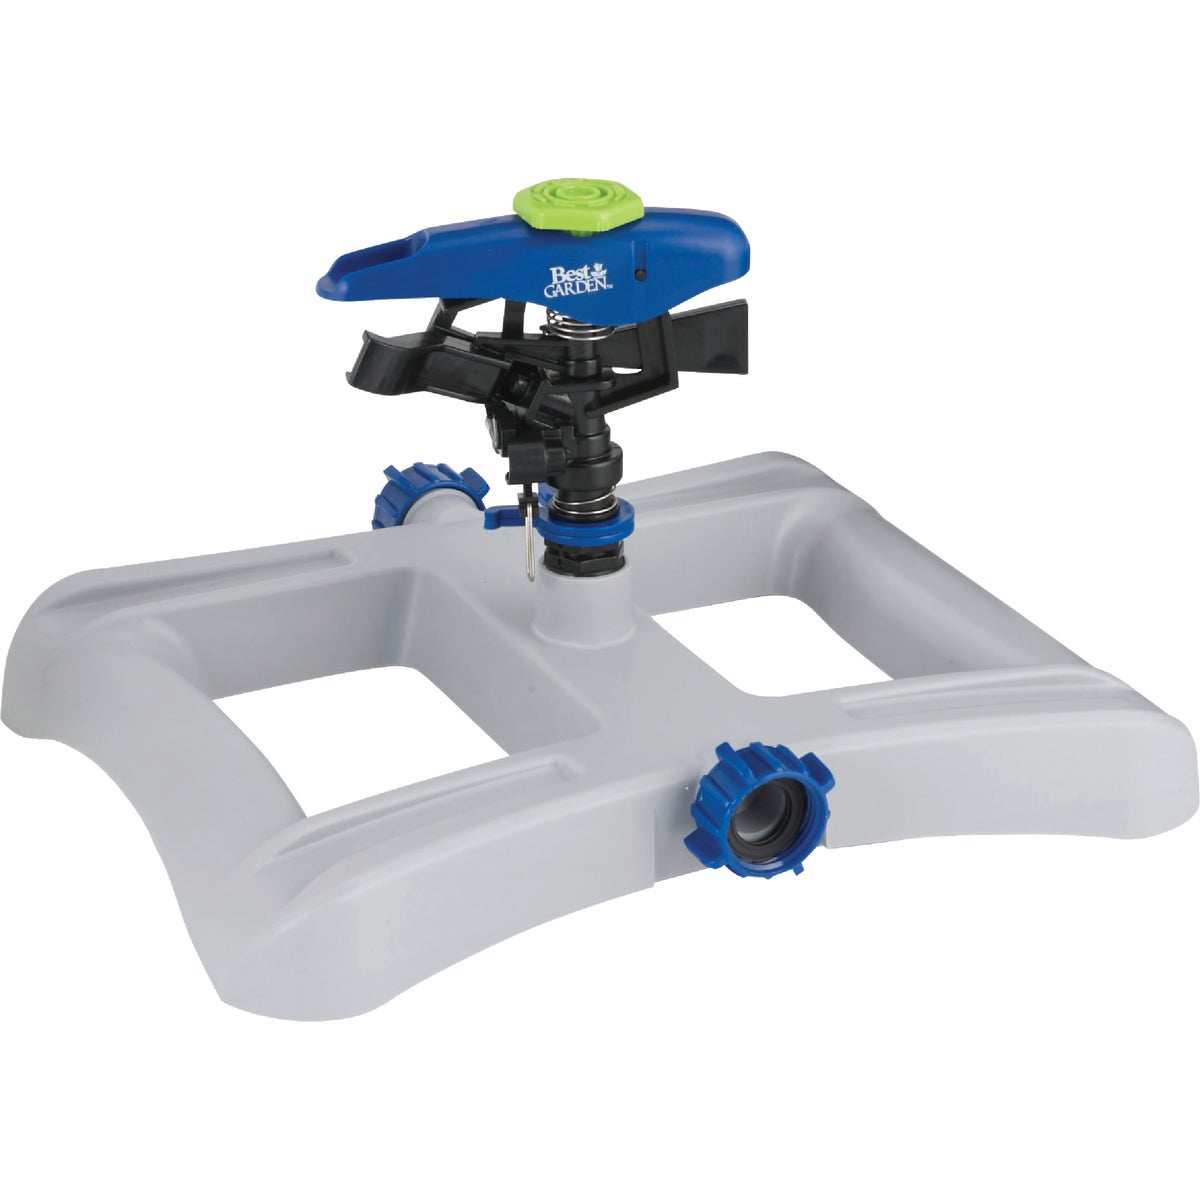 Item 724354, Impact-resistant impulse sprinkler with poly base. Coverage to 86 Ft.